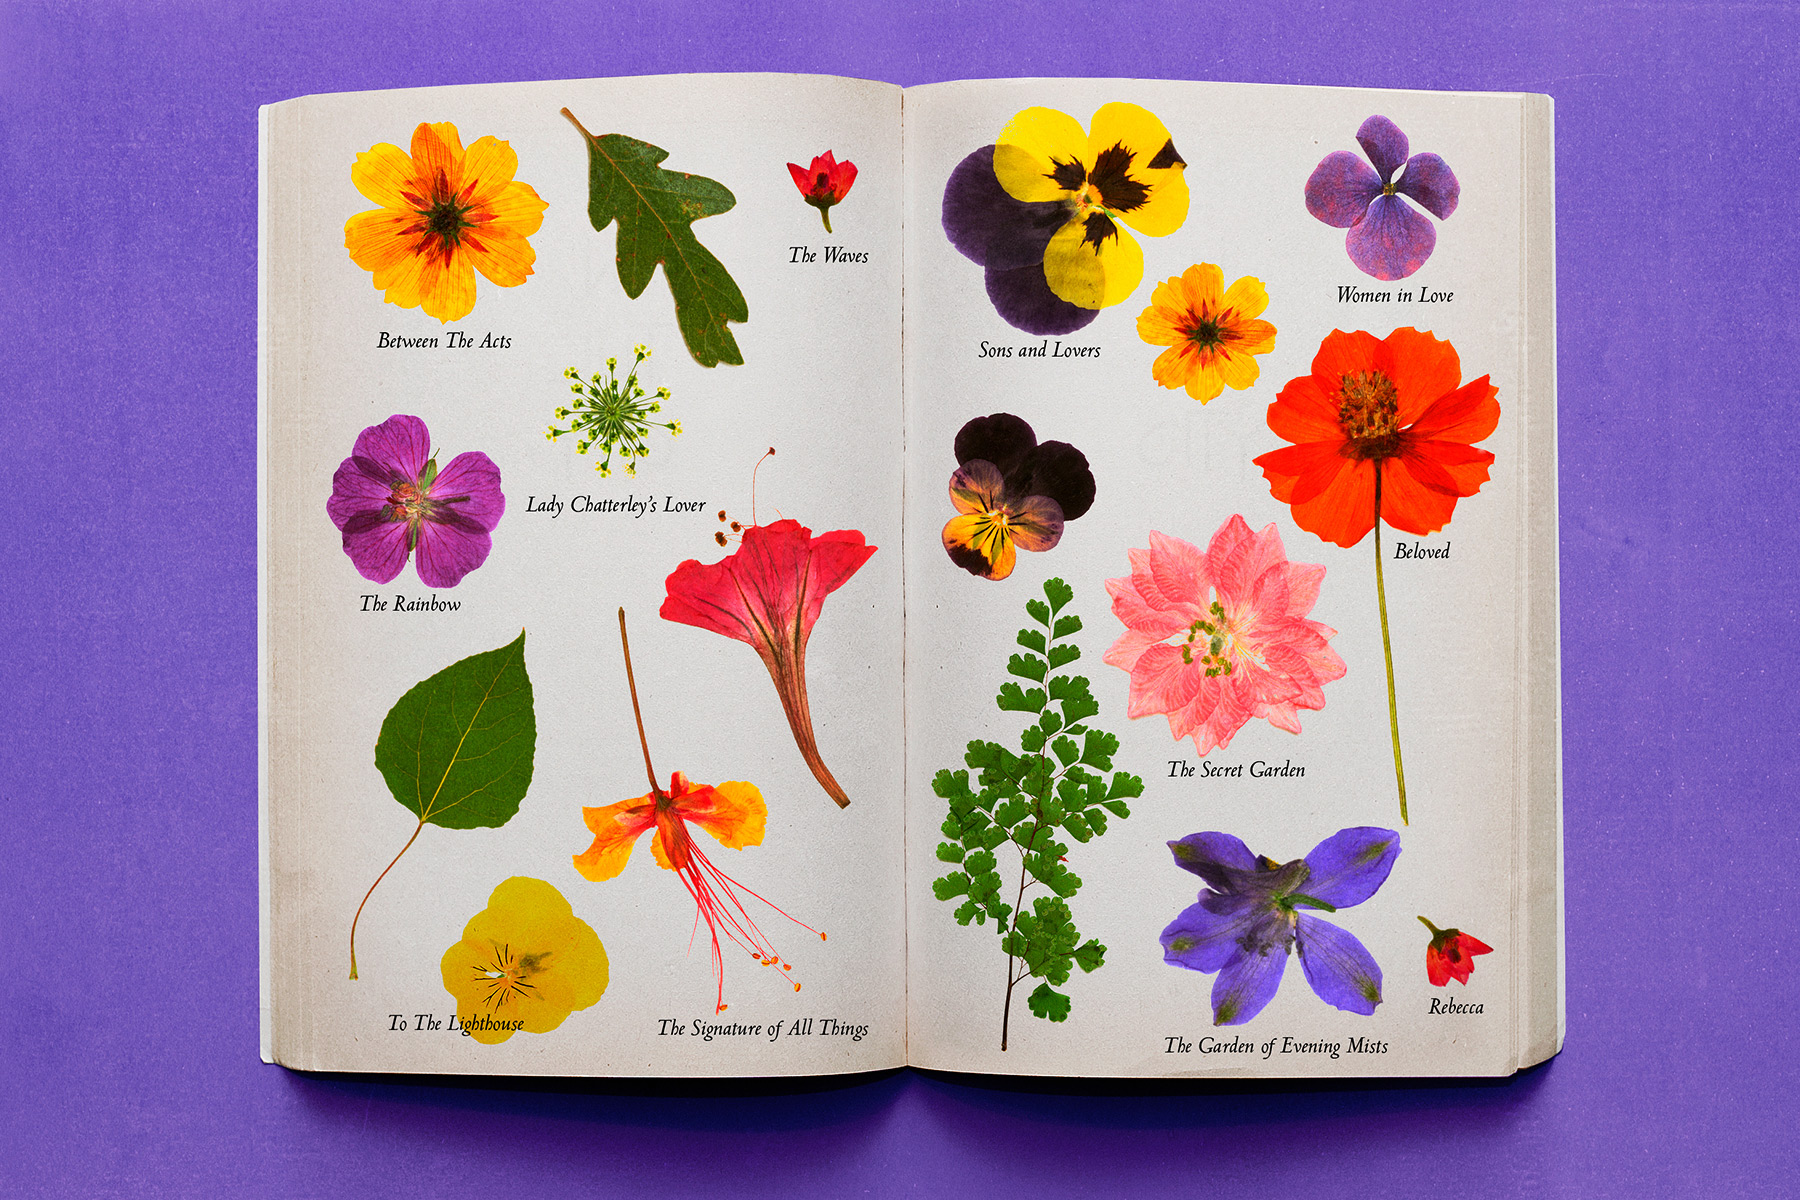 Pressed flowers between the pages of a book with names of books underneath them